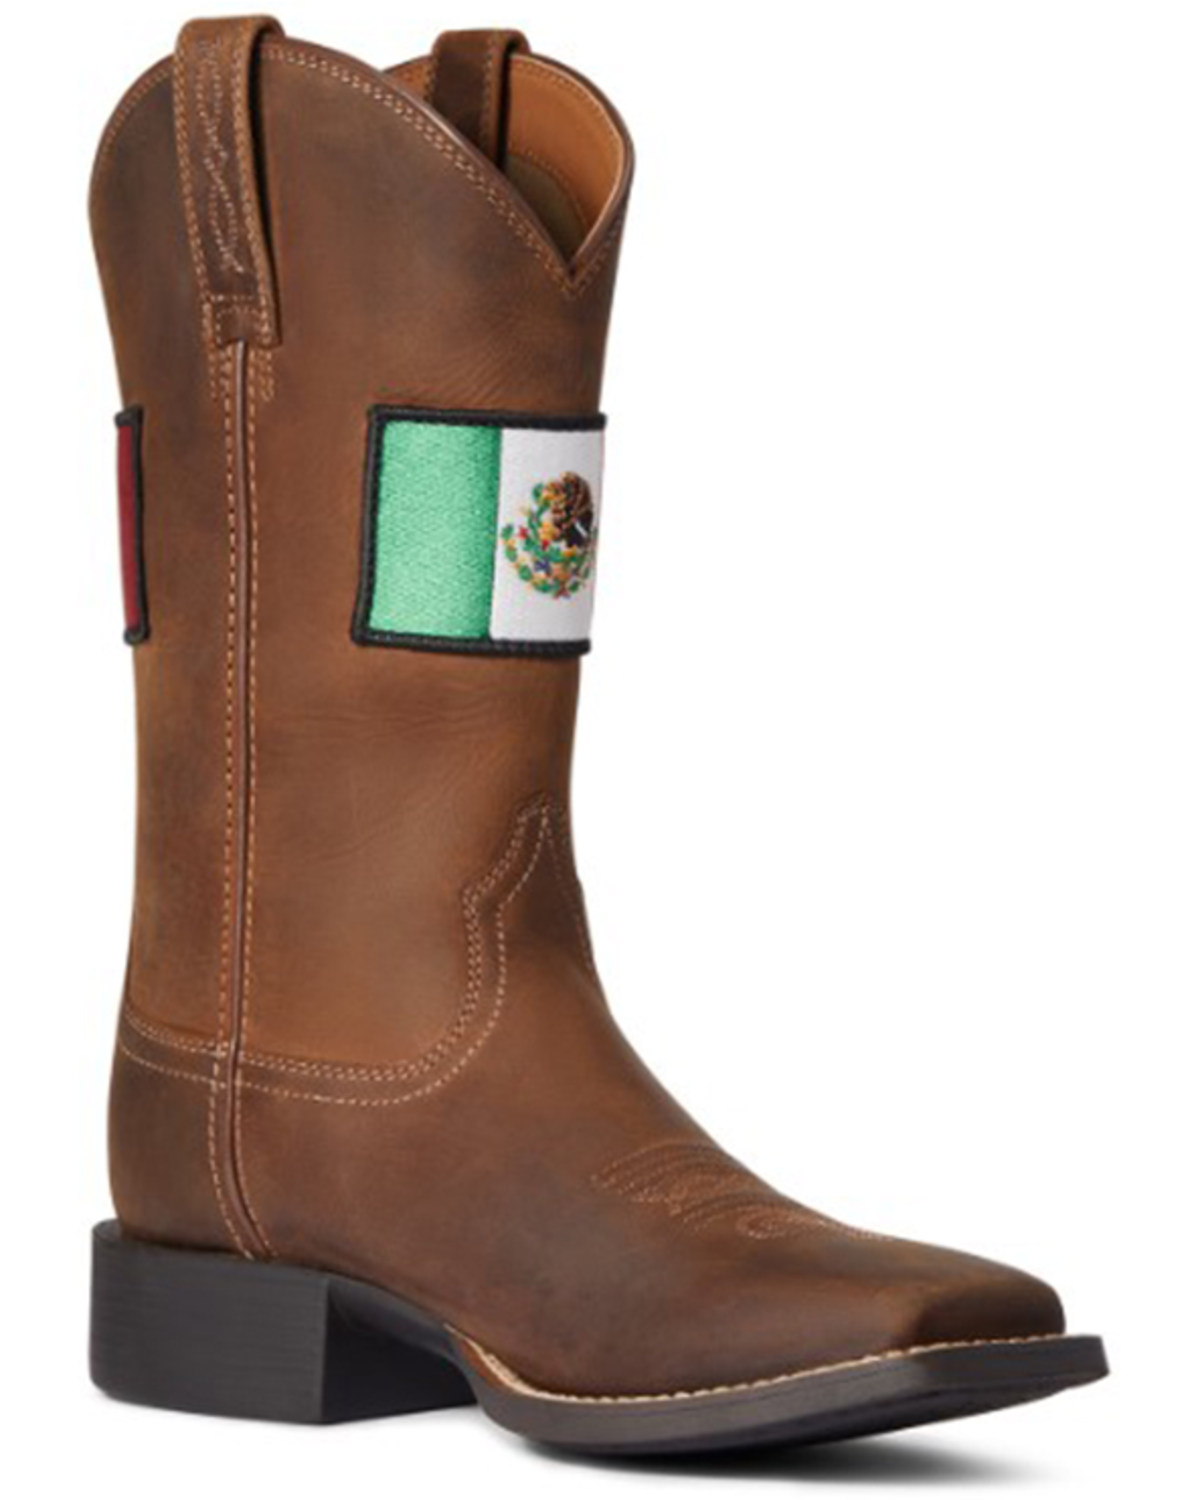 Ariat Women's Distressed Round Up Orgullo Mexicano Performance Western Boot - Broad Square Toe